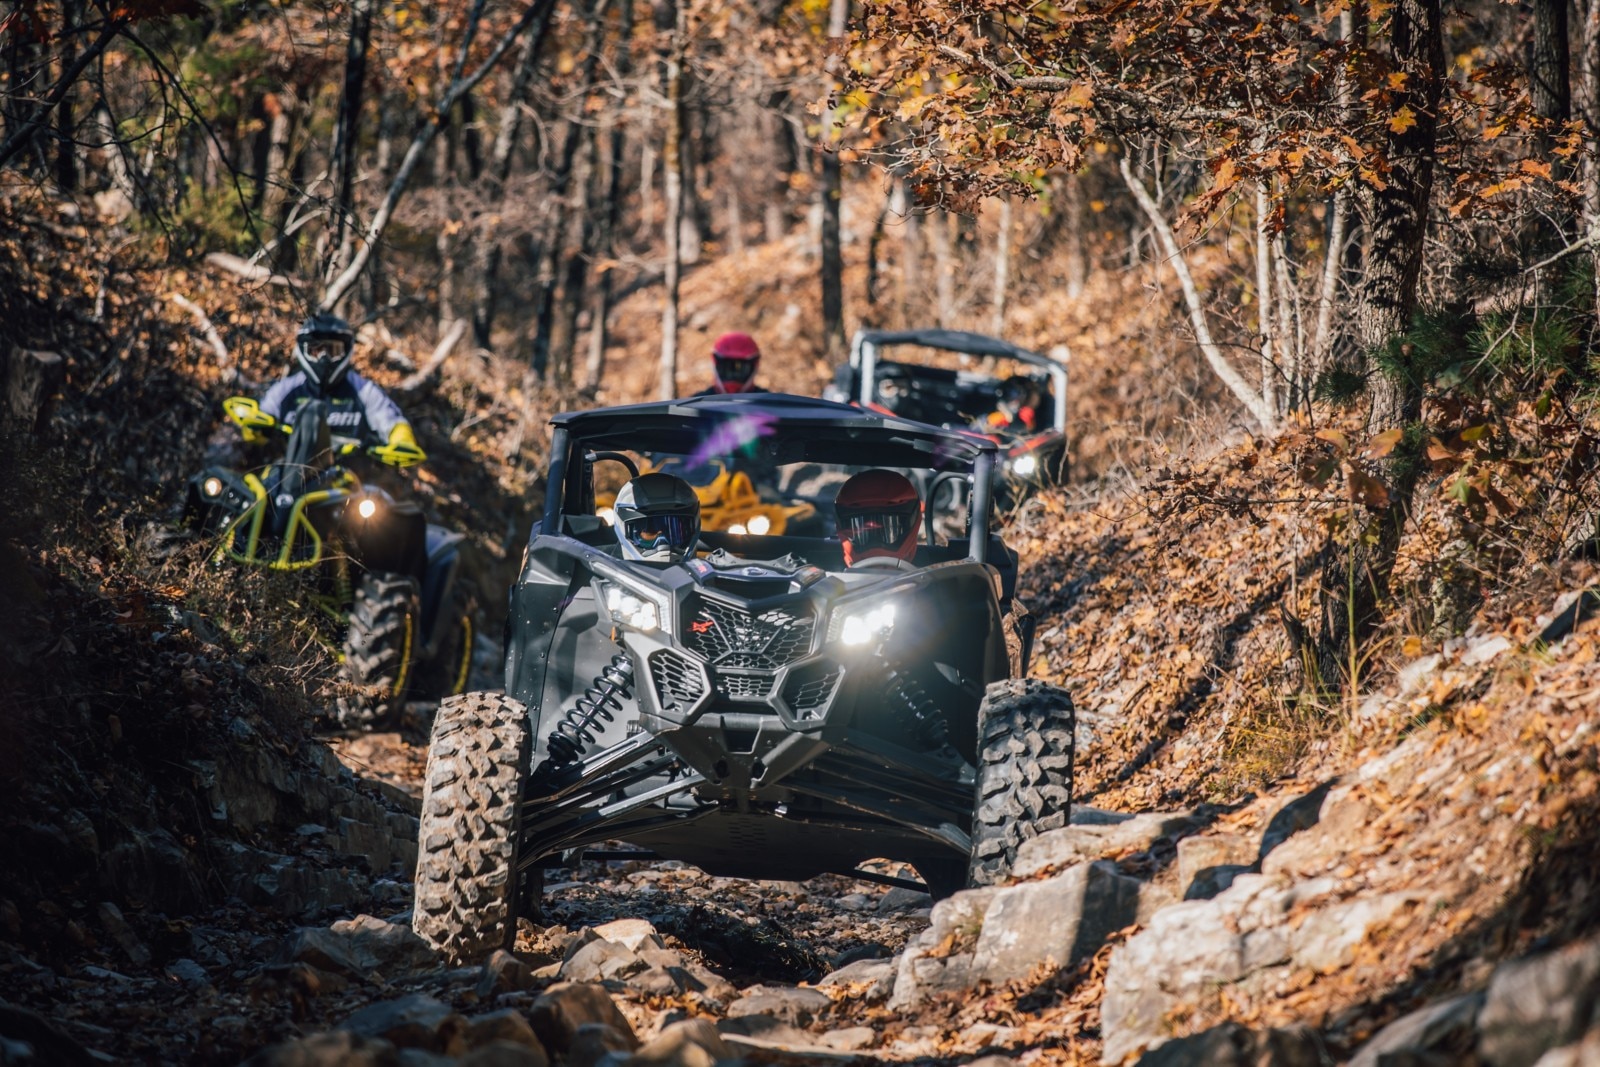 Two riders in a Can-Am side-by-side, on a rocky trail in the woods with other riders.